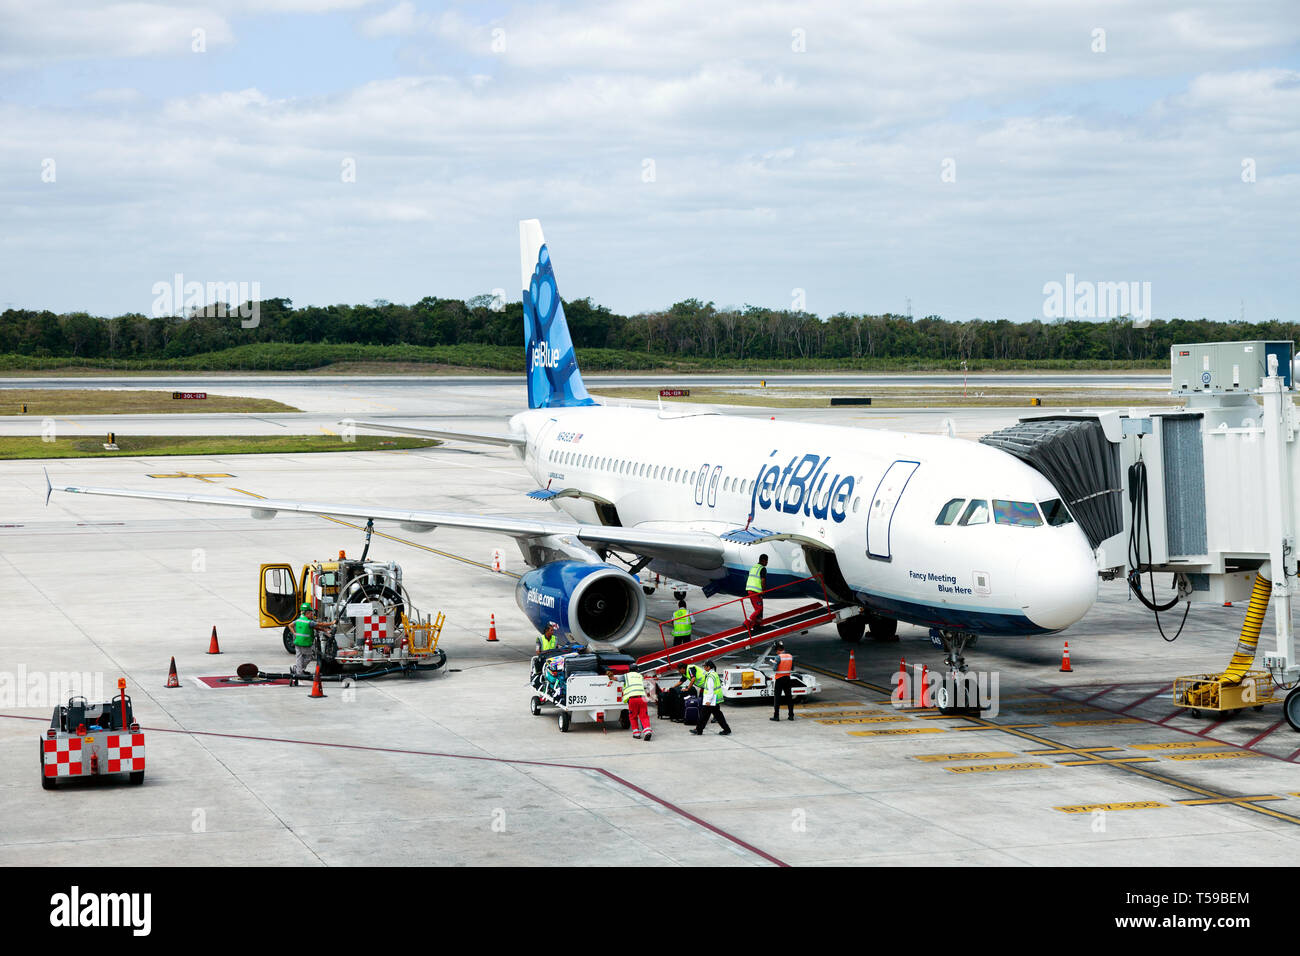 A JetBlue plane on the ground at Cancun Airport, Mexico Stock Photo